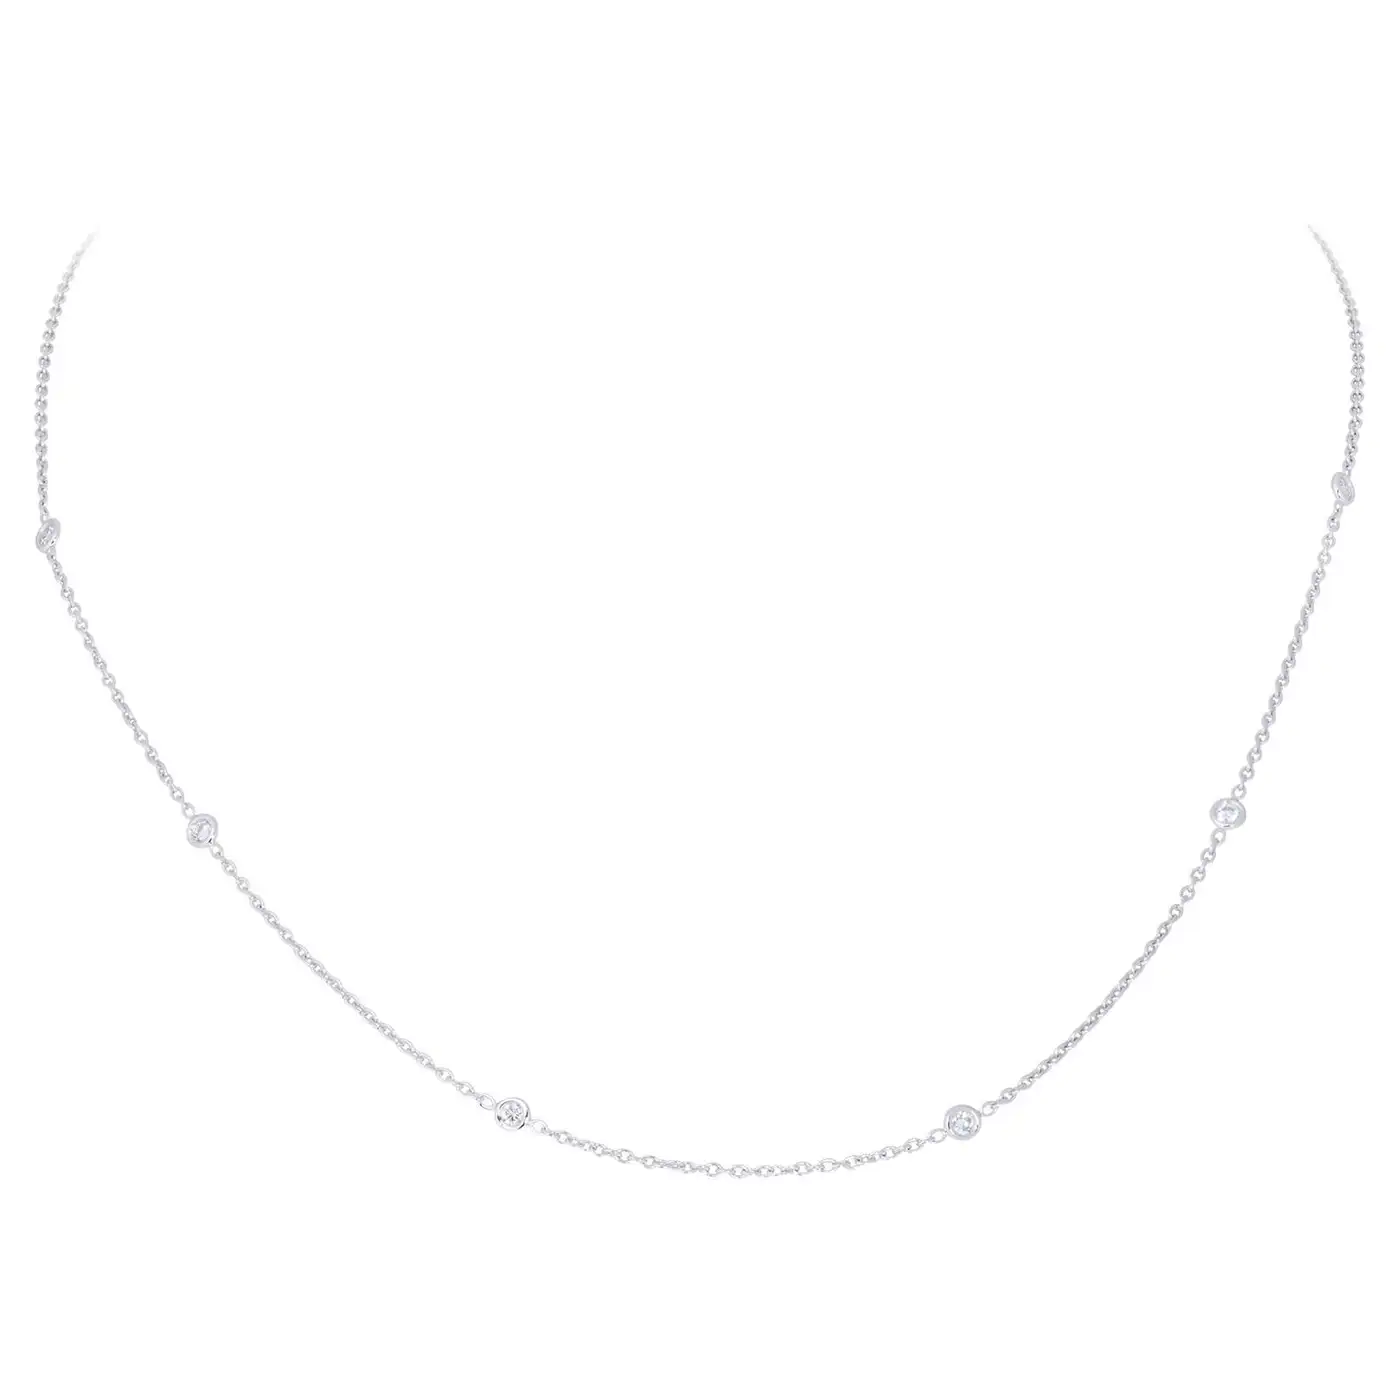 Penny-Preville-White-Gold-and-Diamond-Station-Necklace-1.webp